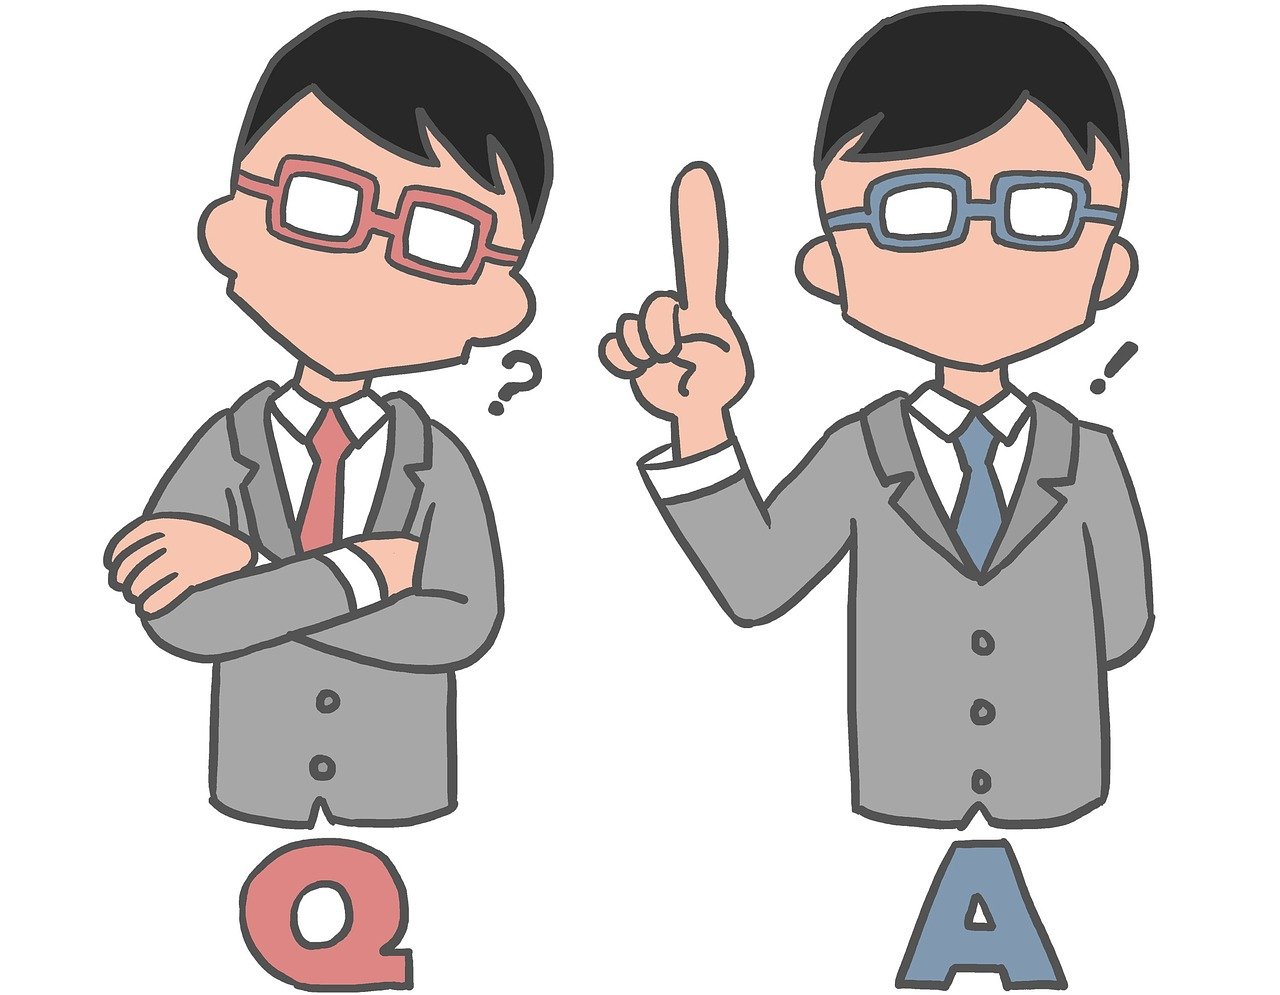 a man in a suit standing next to another man in a suit, a cartoon, by Oka Yasutomo, neo-dada, glasses without frames, question marks, pointing index finger, encyclopedia illustration